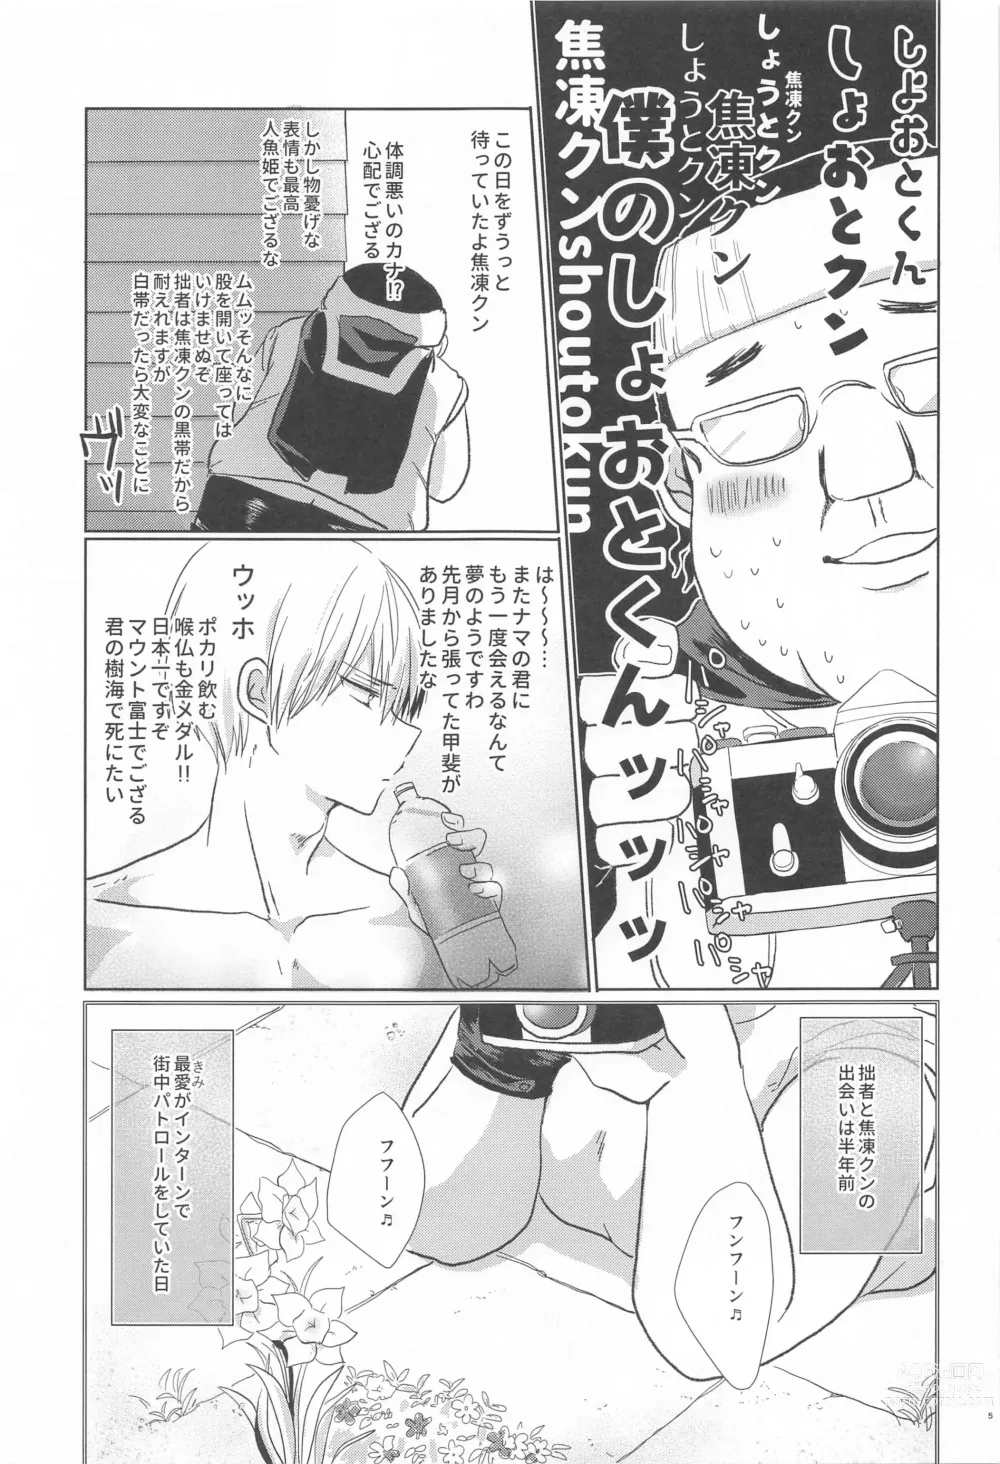 Page 5 of doujinshi 1COIN RANDEZVOUS  - 10min Limited